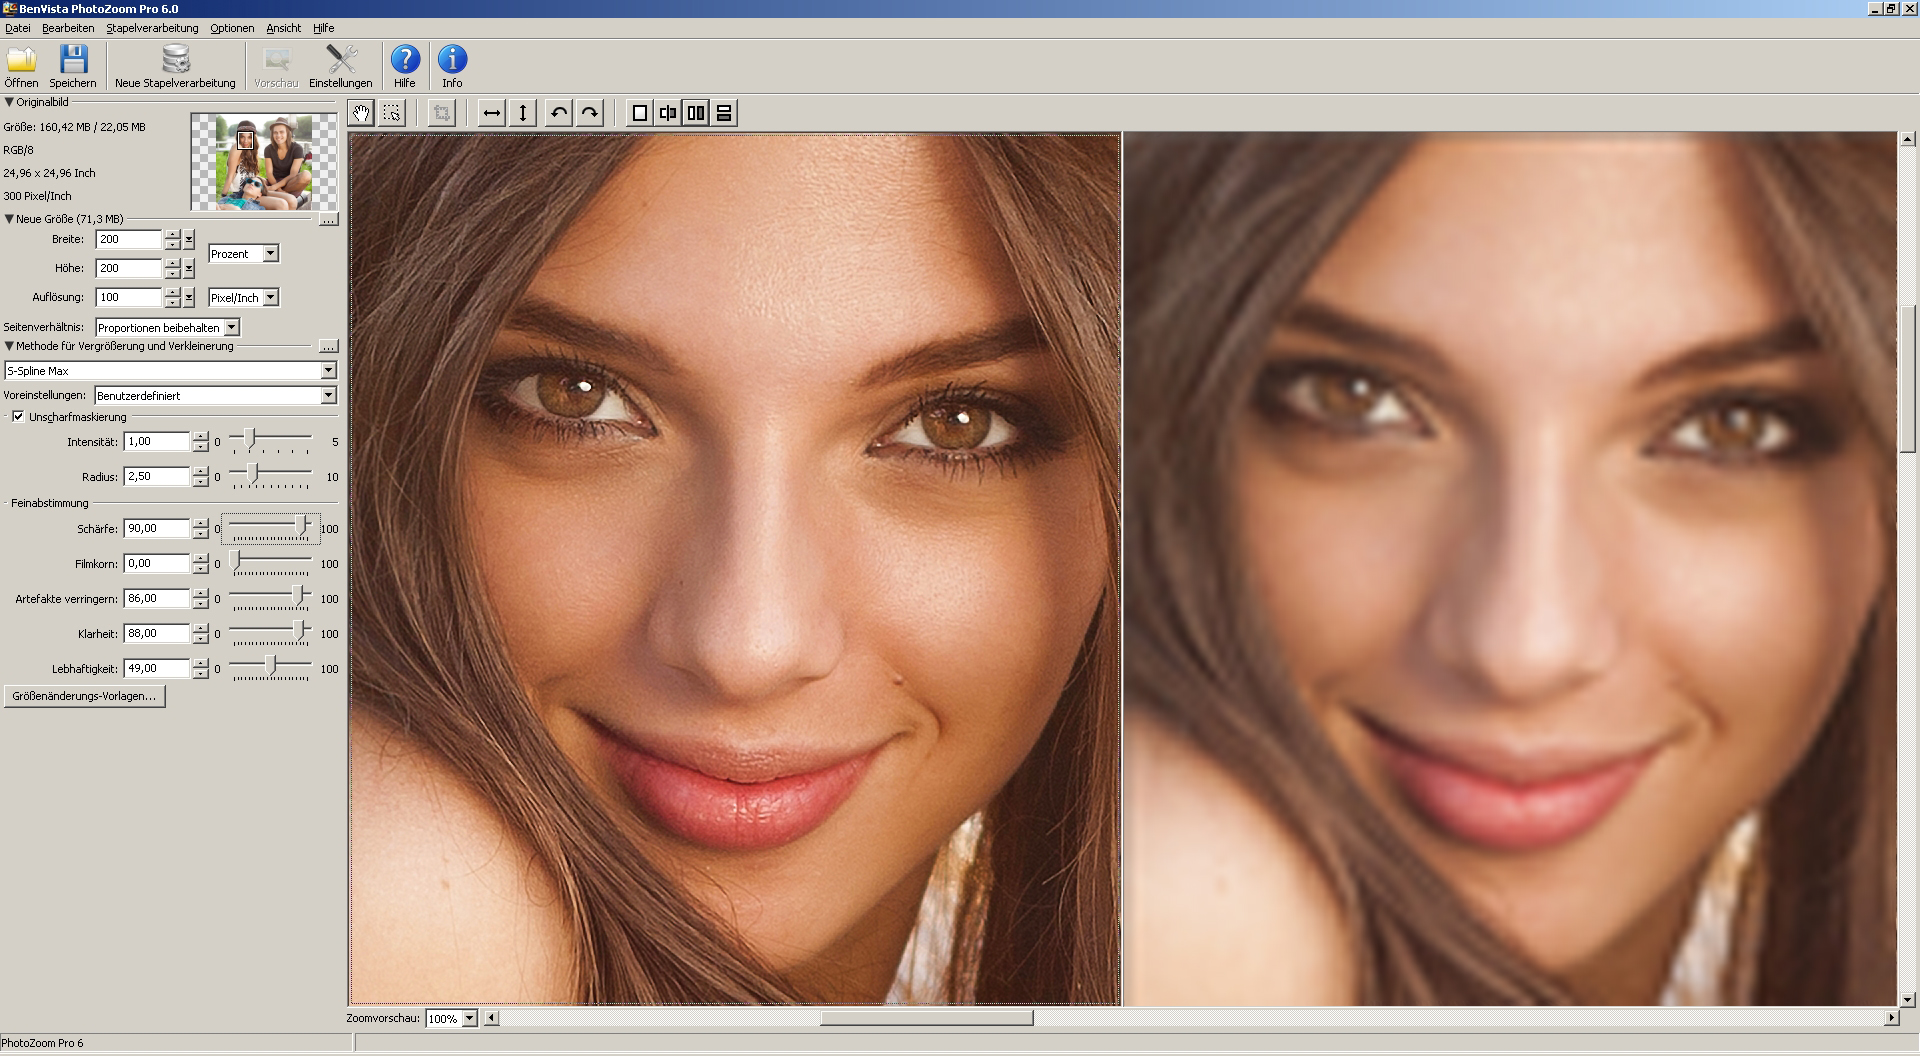 compare photozoom 6 standard to photozoom 6 pro and 6